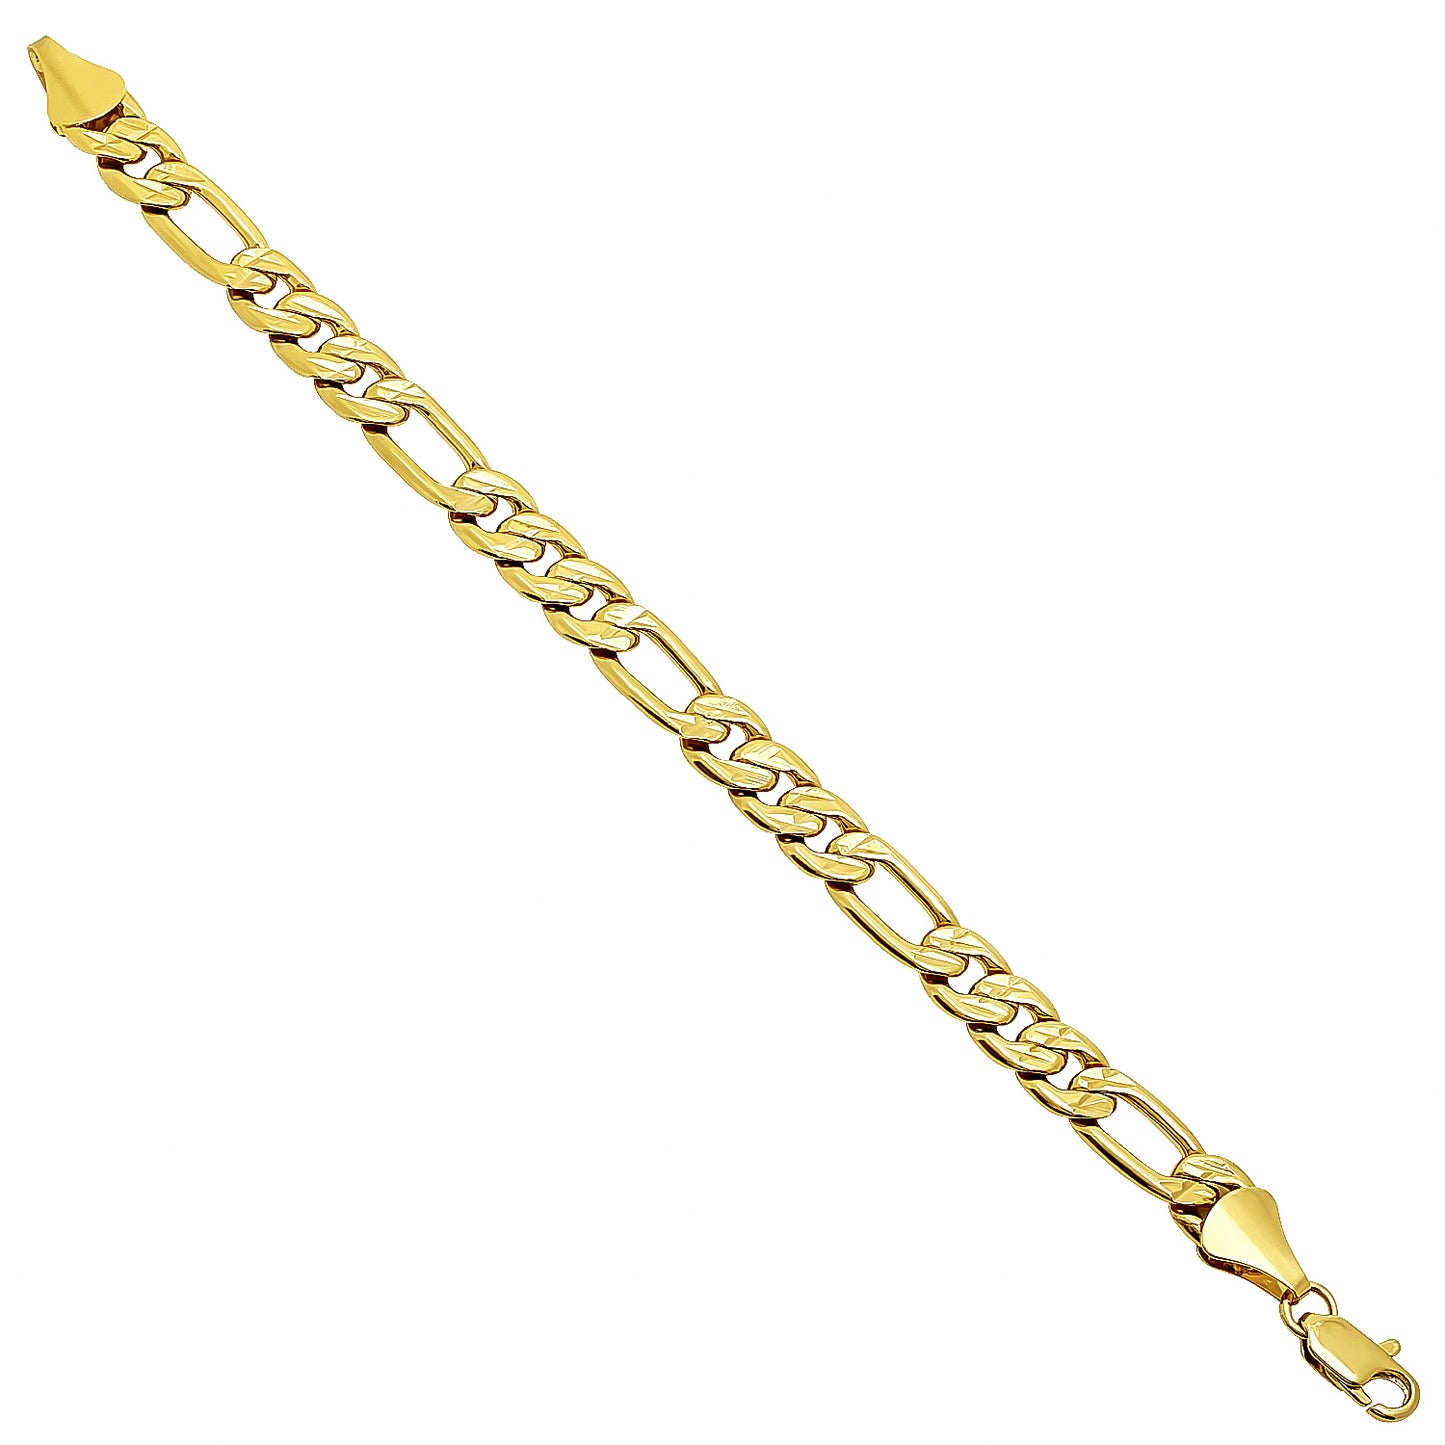 9mm Diamond-Cut 0.25 mils (6 microns) 14k Yellow Gold Plated Flat Figaro Chain Necklace, 7'-36' + Jewelry Cloth & Pouch (SKU: GL-010J)